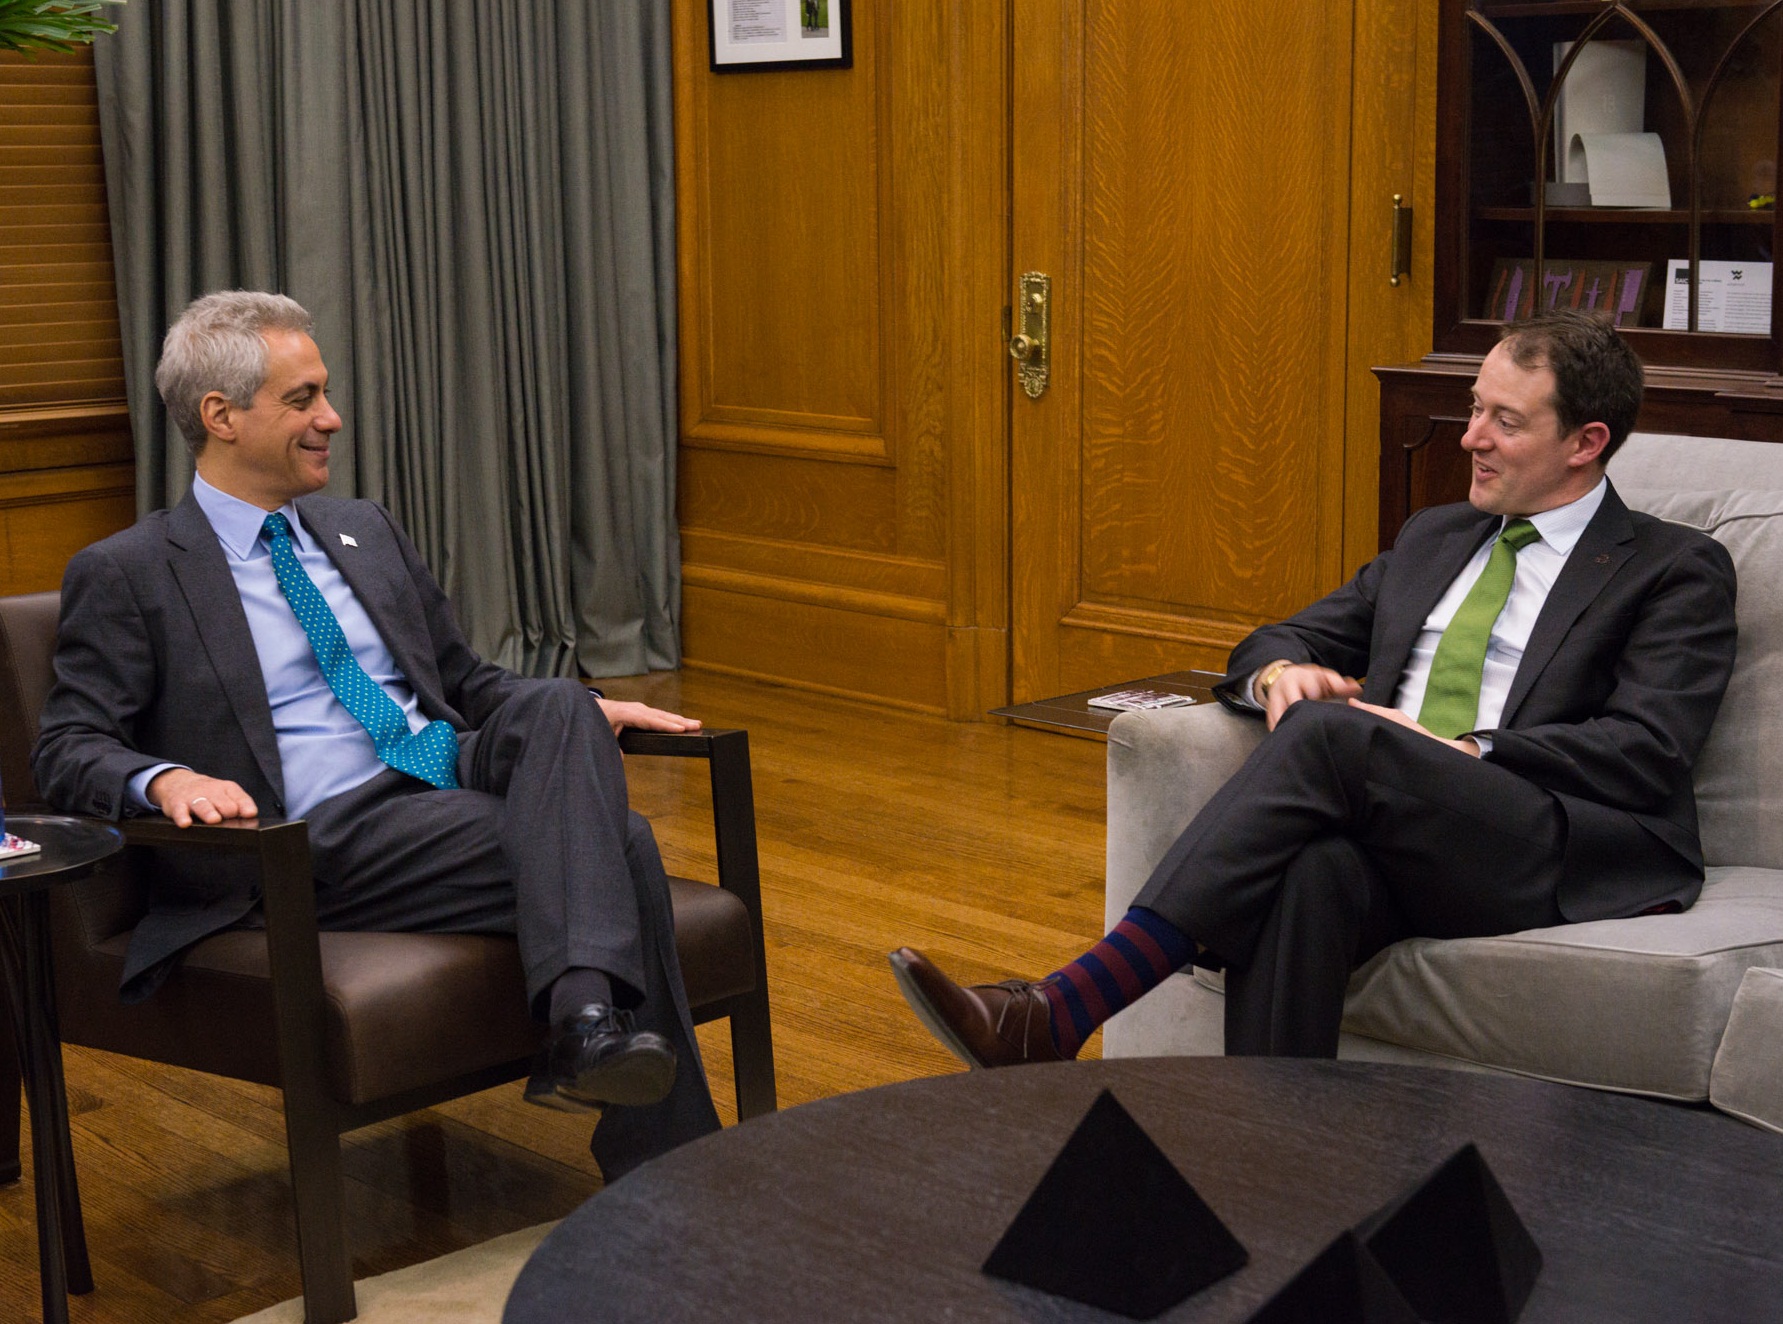 Mayor Emanuel welcomes the Irish Minister for Enterprise and Innovation, Seán Sherlock, to Chicago.